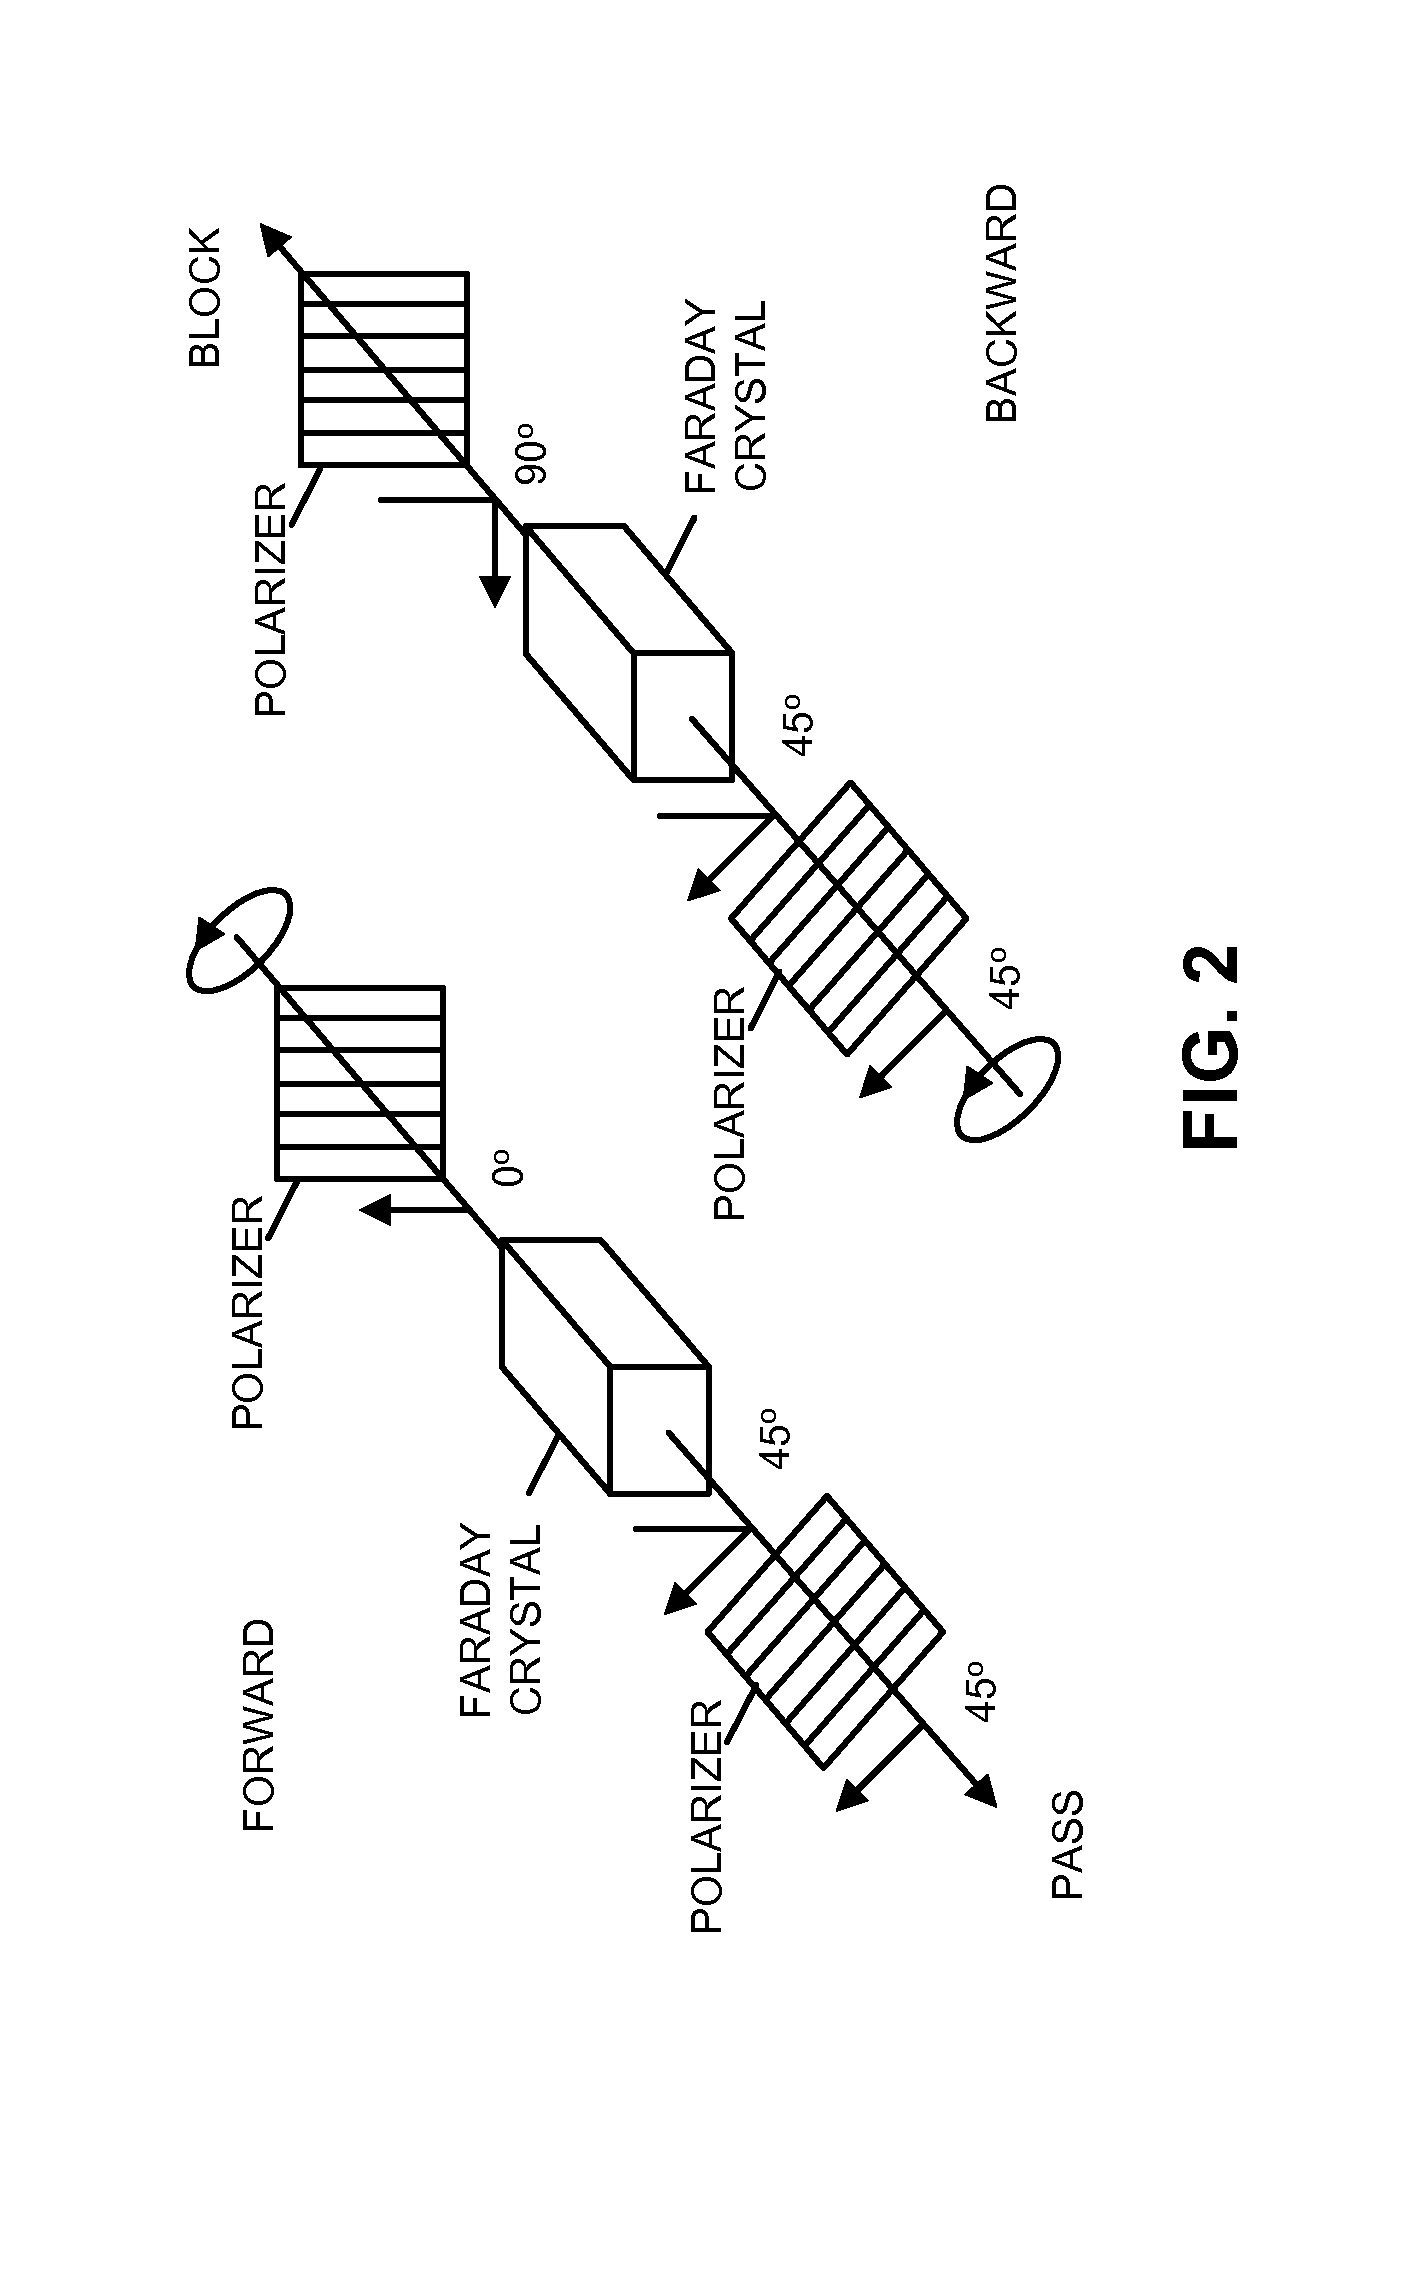 Integrated laser with back-reflection isolator